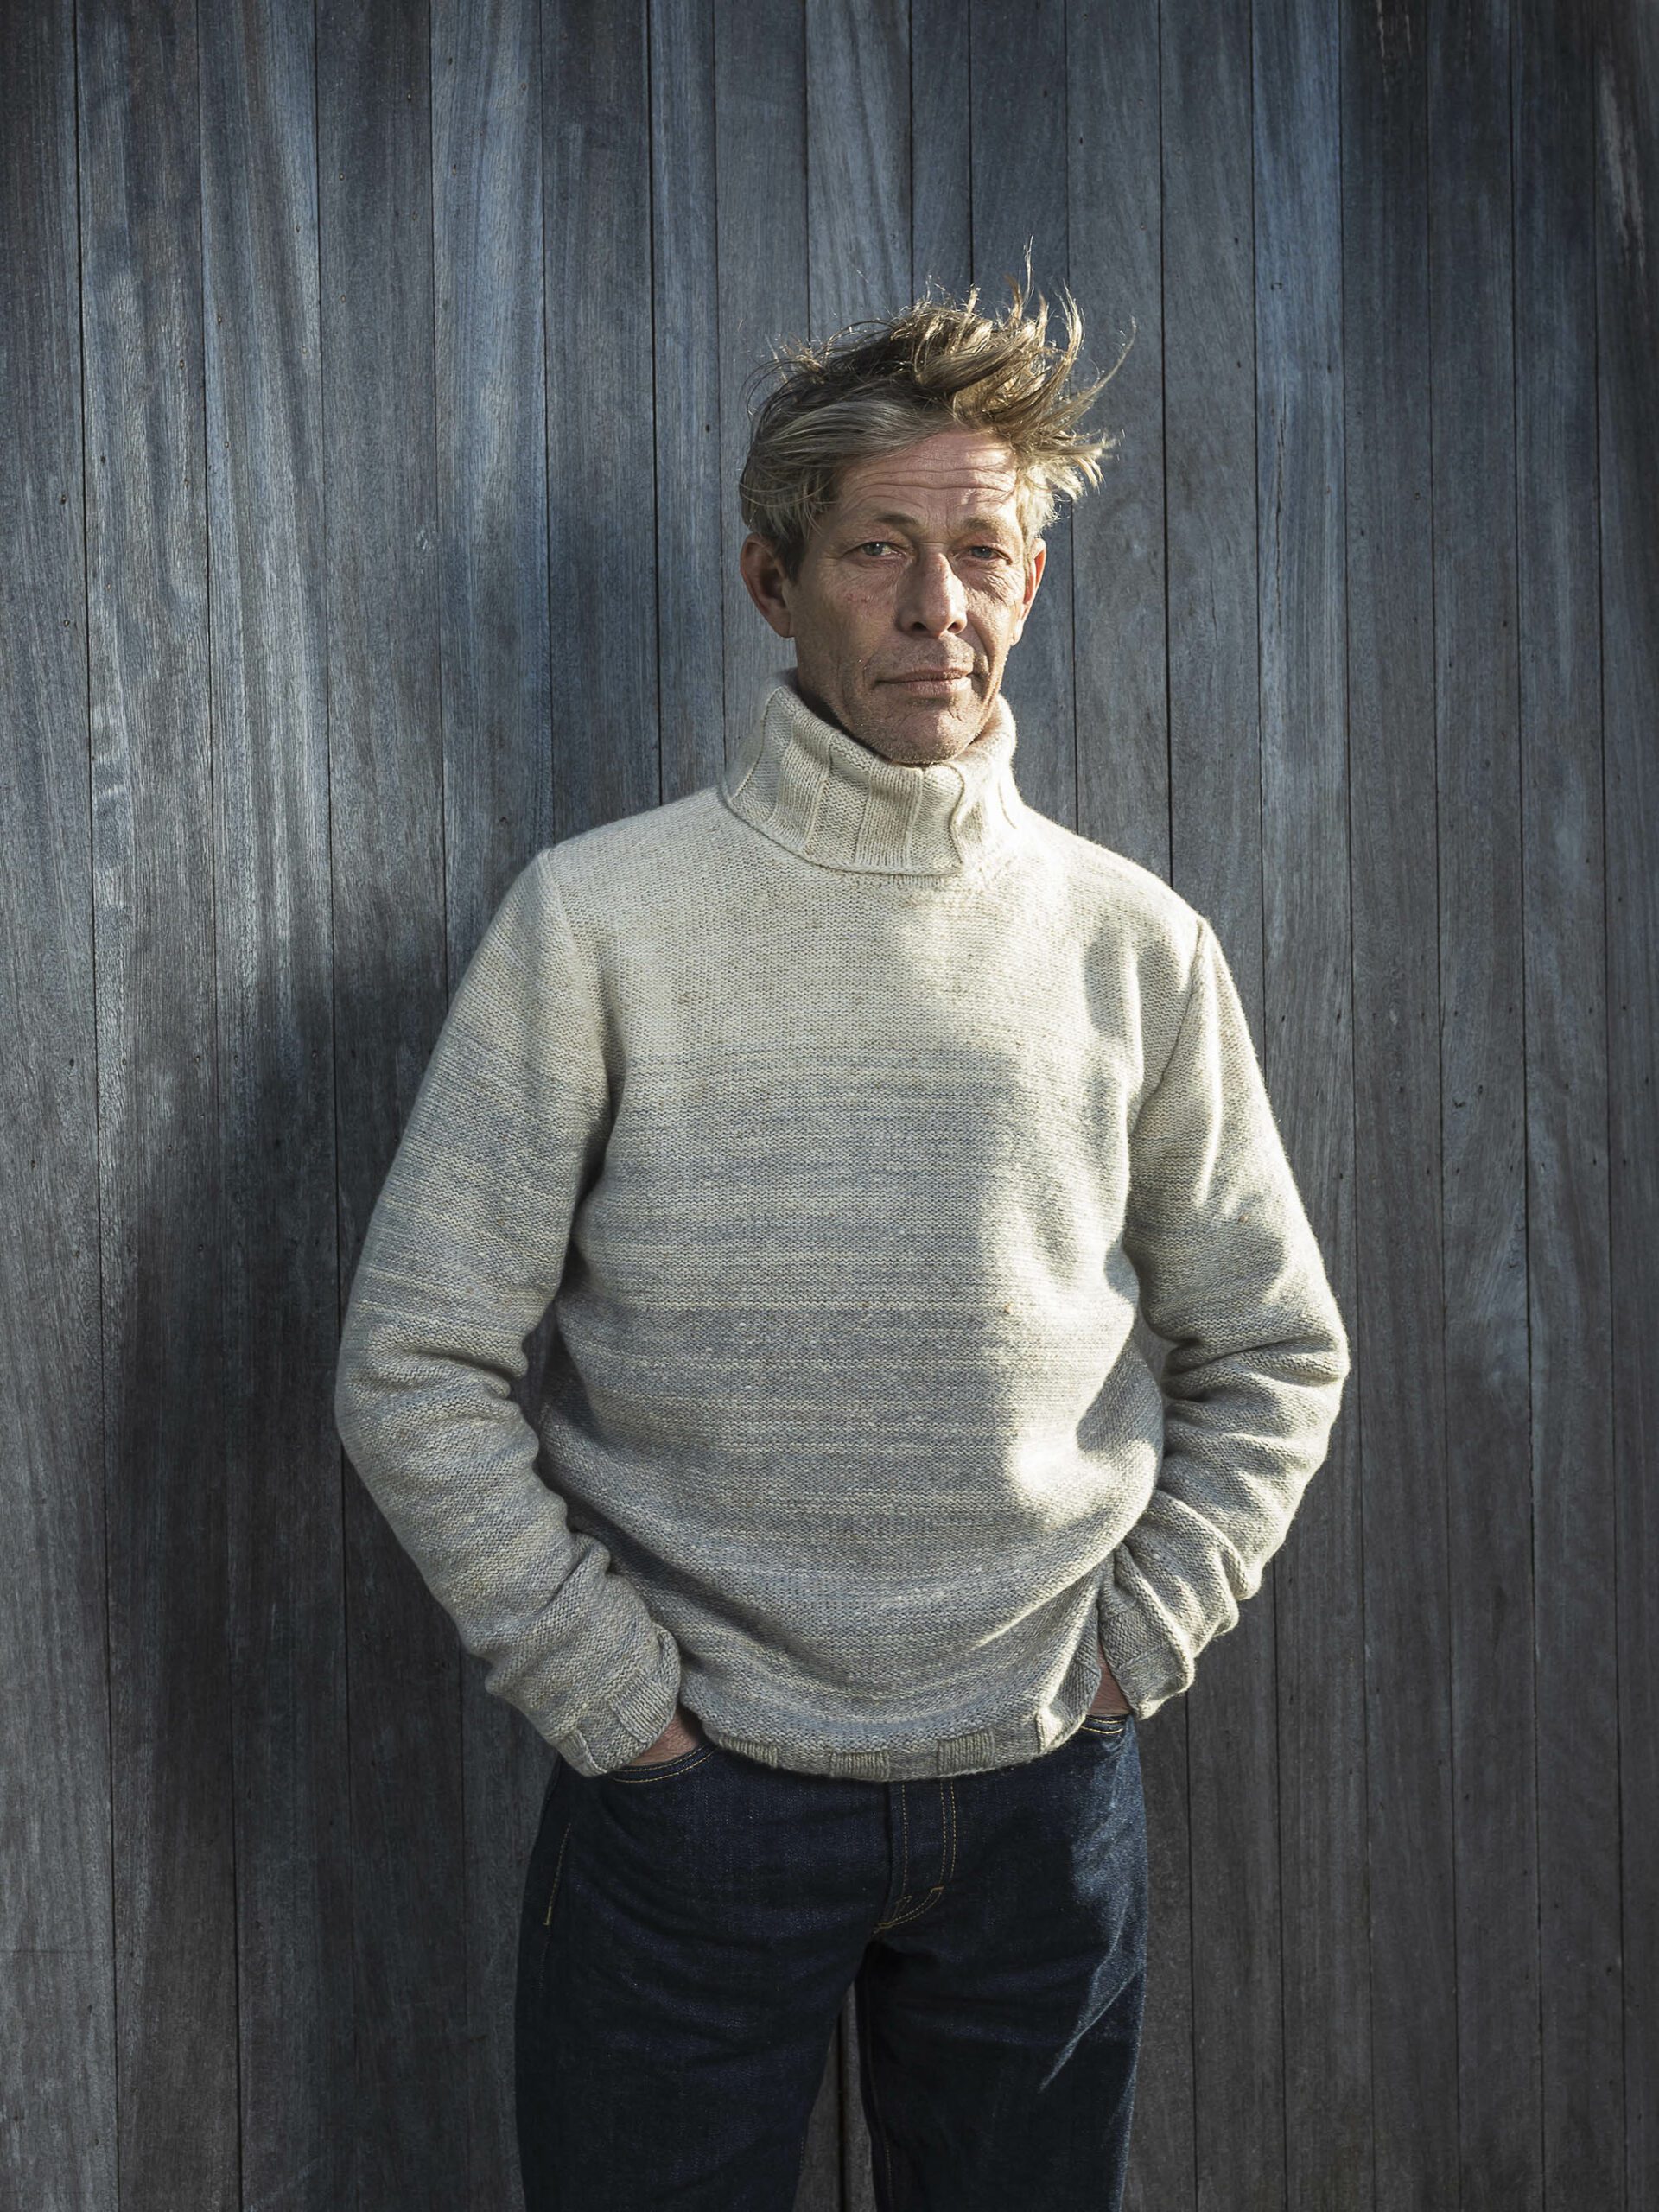 https://inismeain.ie/wp-content/uploads/2023/09/A2019_Inis_Meain_Landscape_Turtle_Neck_Grey_Mix_3x4_Model_1-scaled.jpg